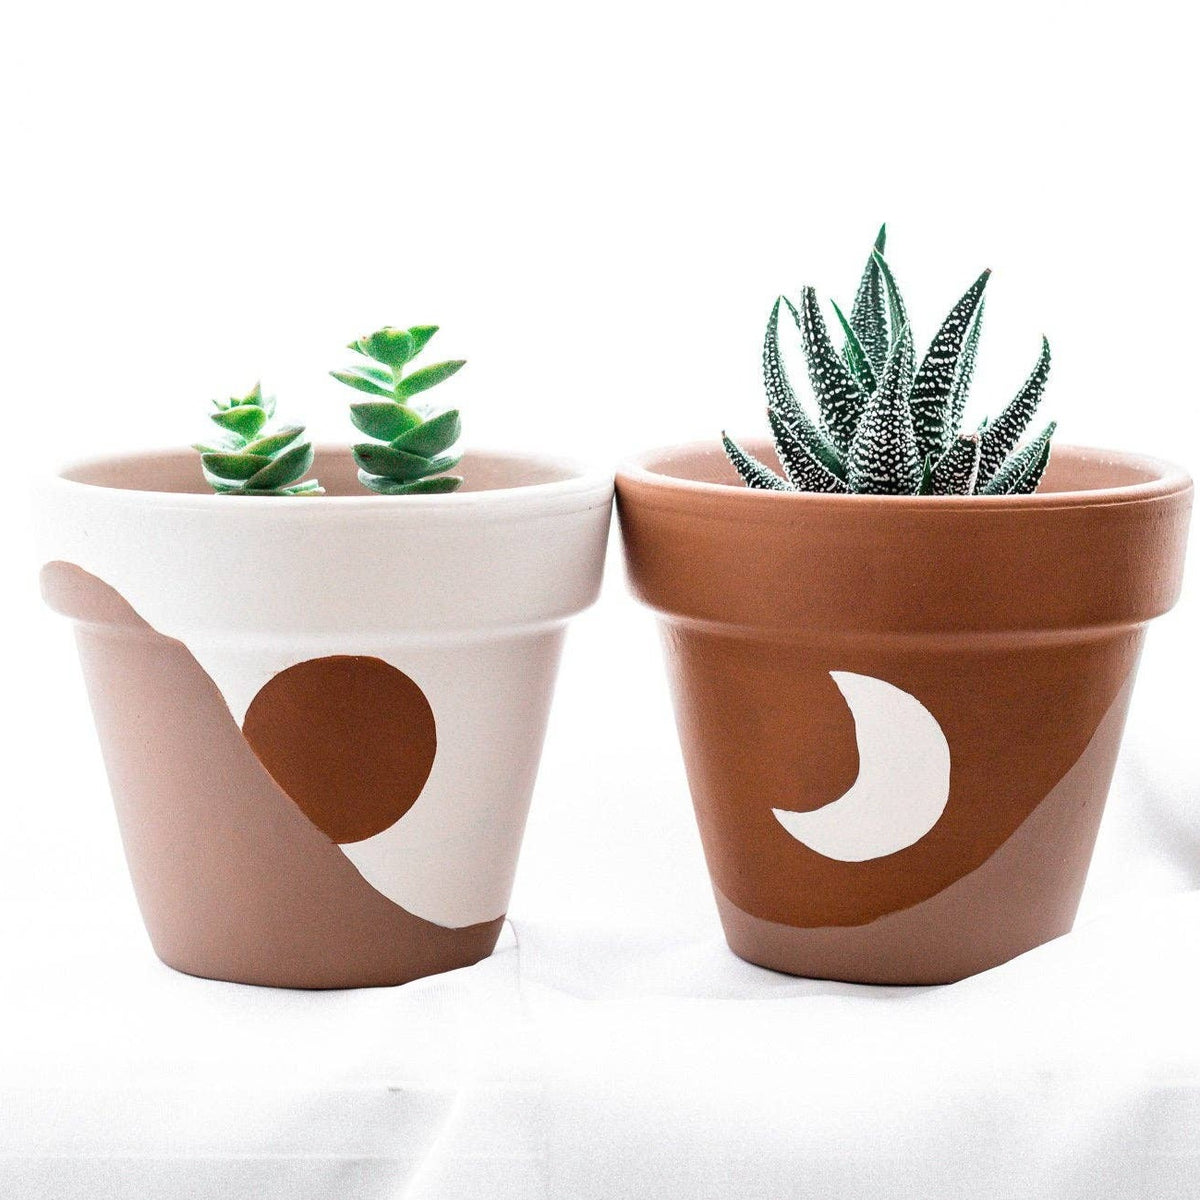 Sun and Moon Pot Set | Hand Painted Terracotta Pots with Drainage Hole